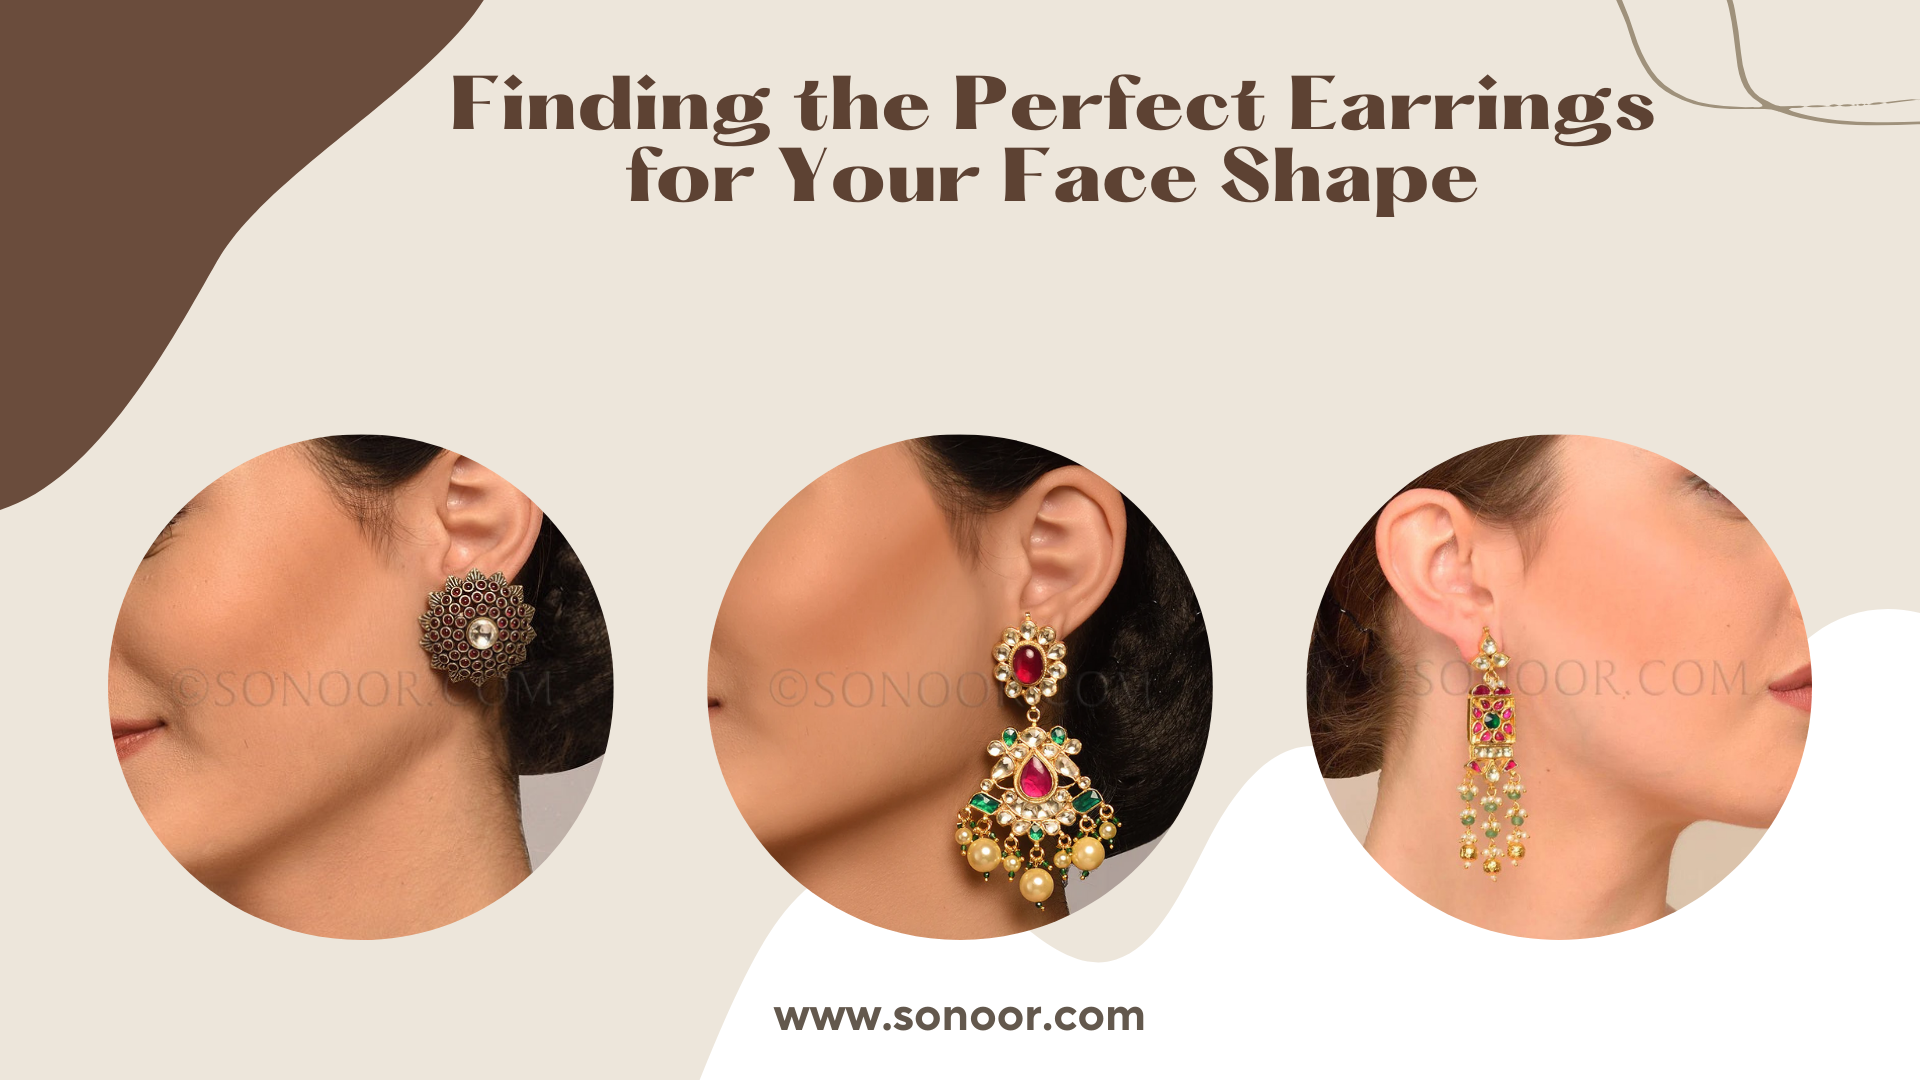 Finding the Perfect Earrings for Your Face Shape: A Complete Guide by Sonoor